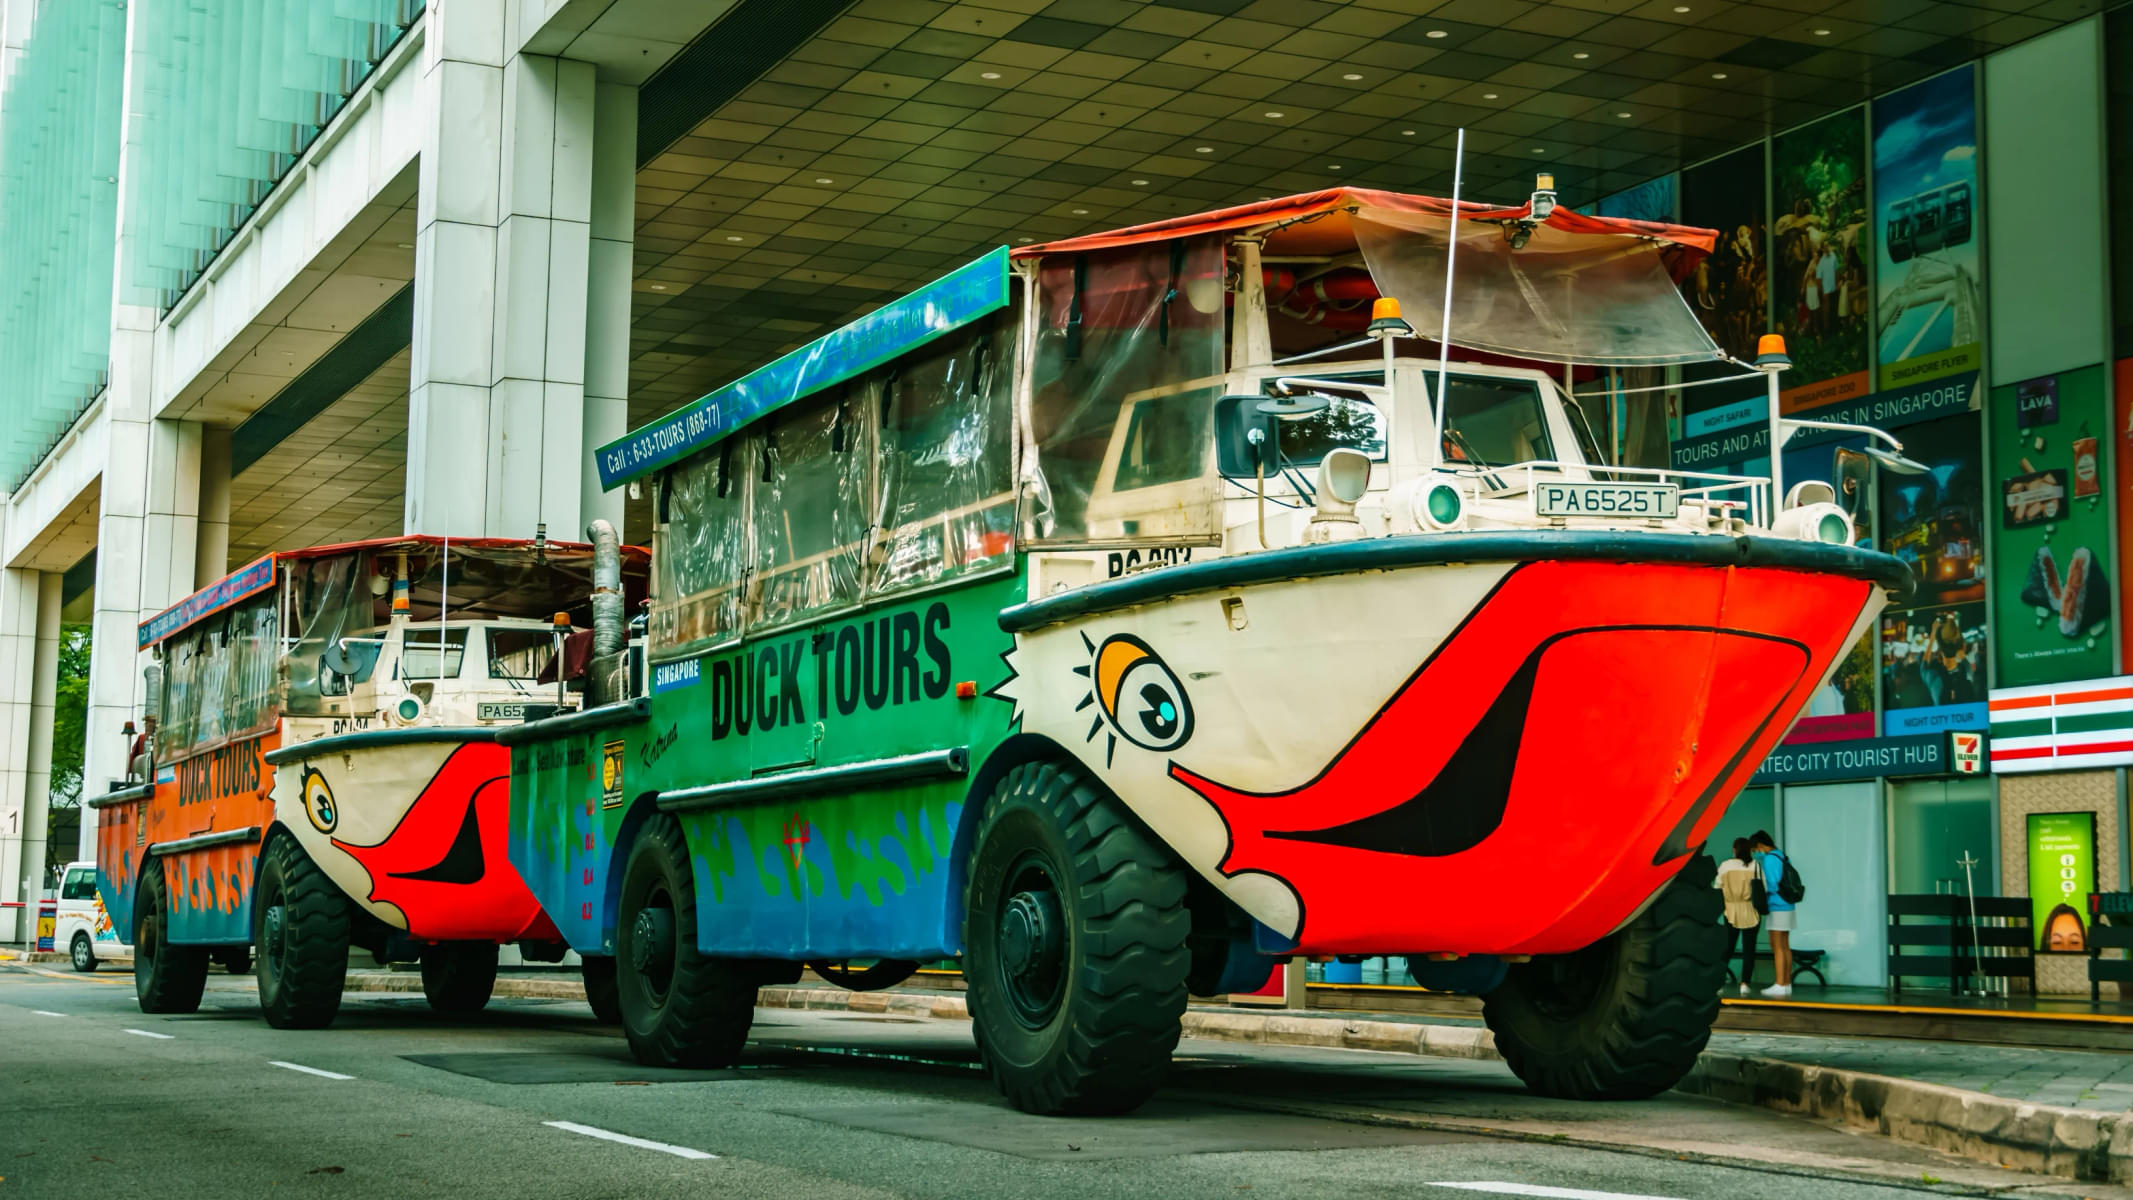 Hop on your funky & vibrant DUCKtour ride with your loved ones